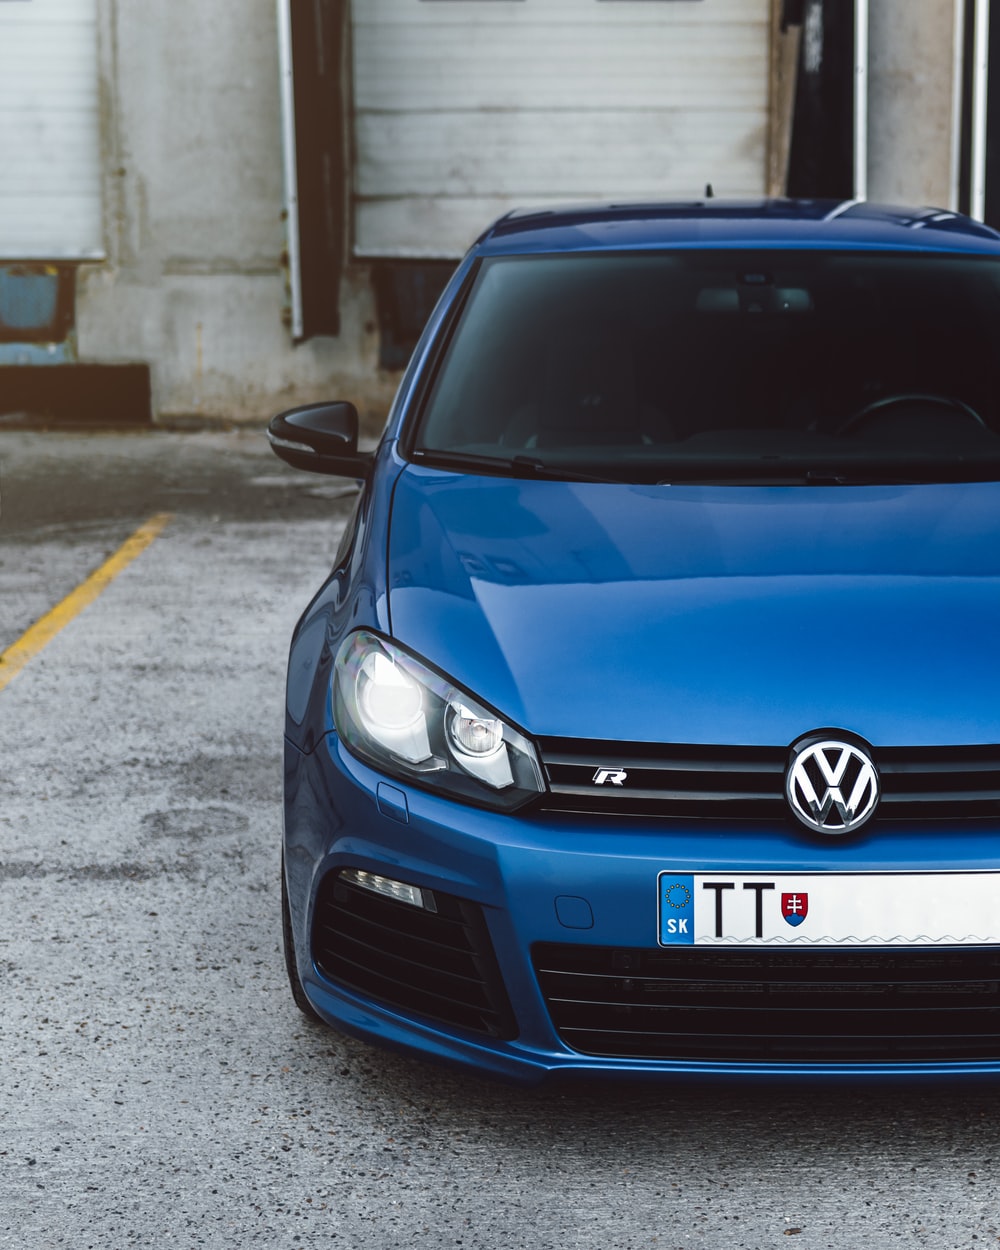 Vw Golf 6 Picture. Download Free Image